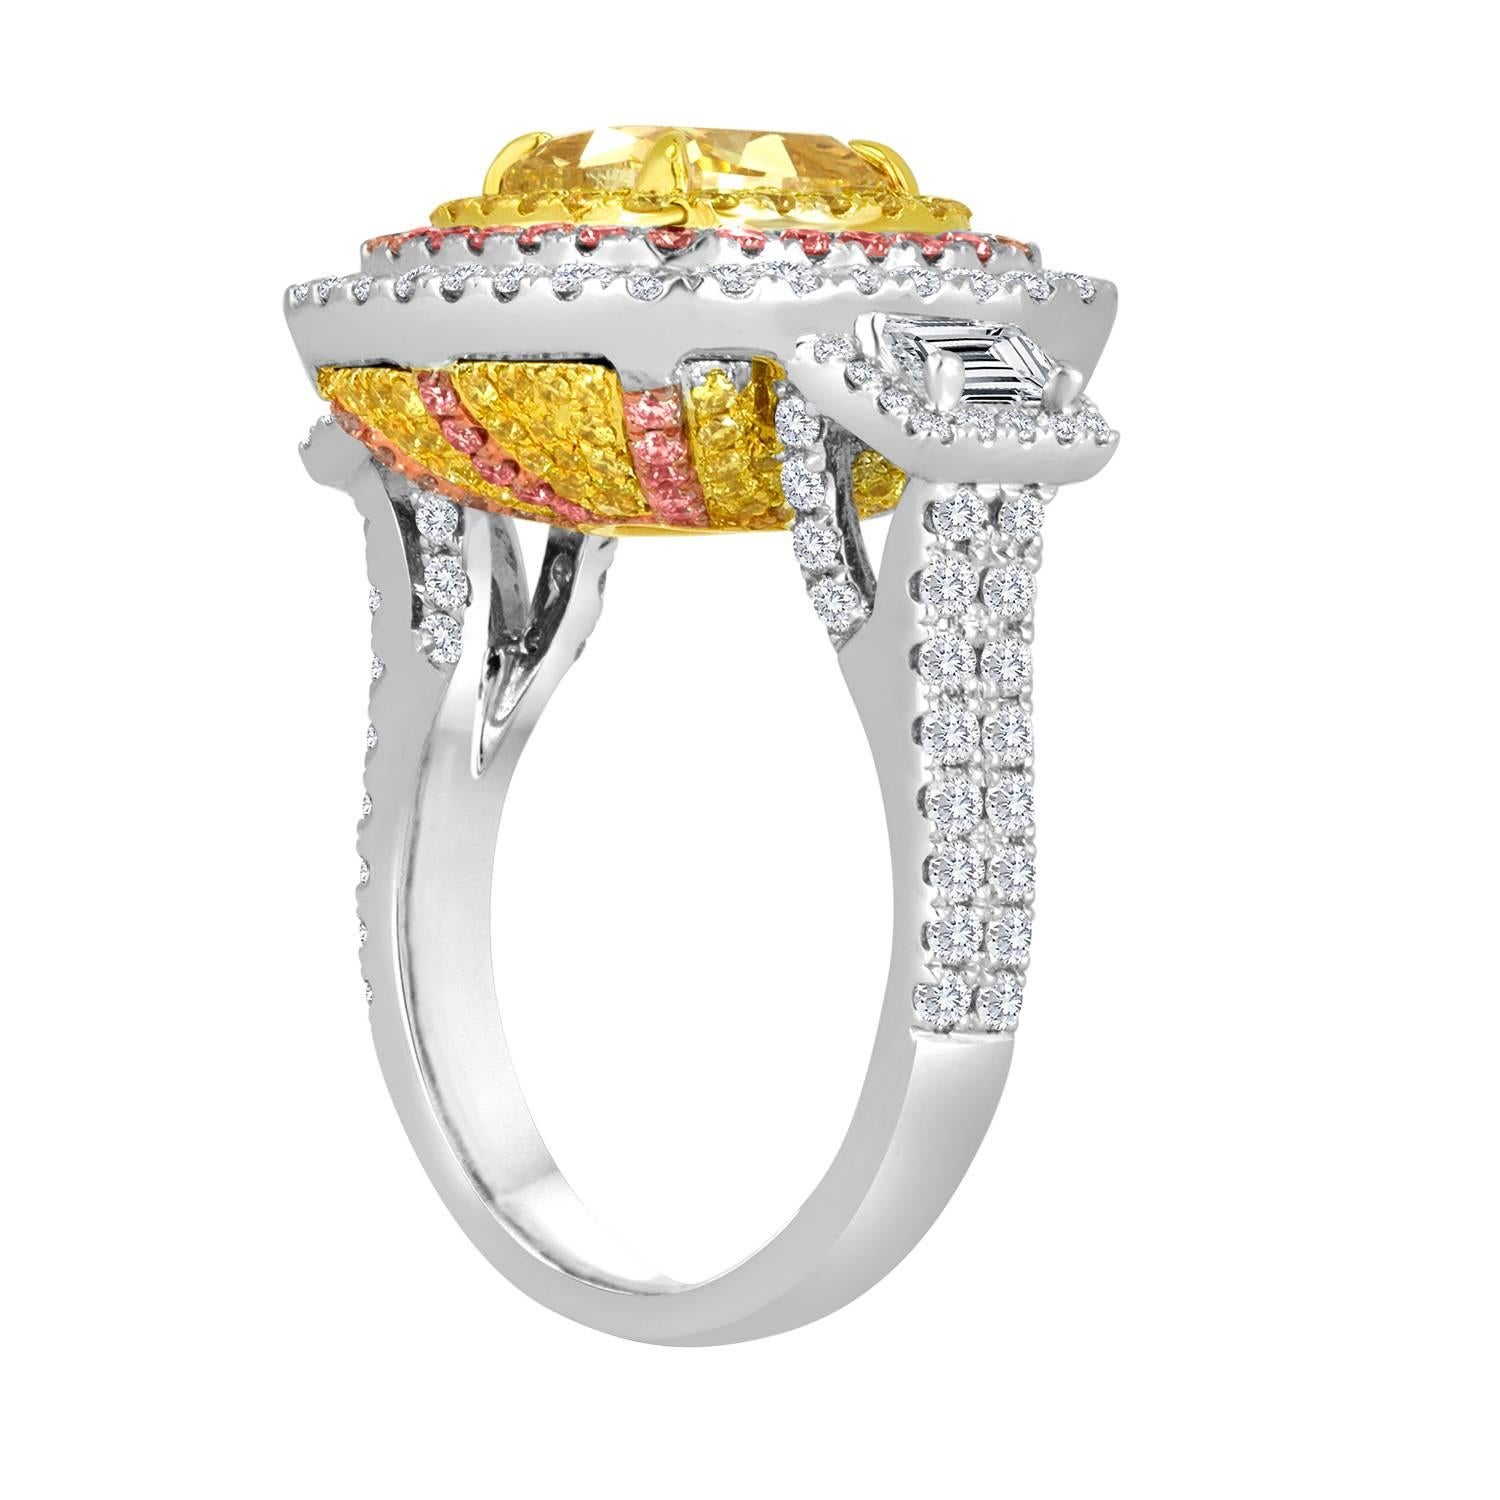 A Gorgeous exquisite Hand Made GIA Certified 2.53 Carat Natural Fancy Light Yellow VVS2 encircled in a triple Halo Natural Fancy Yellow Round Diamonds 0.80 Carat, Natural Fancy Pink Round Diamonds 0.50 Carat and Natural White Round Diamonds 0.93